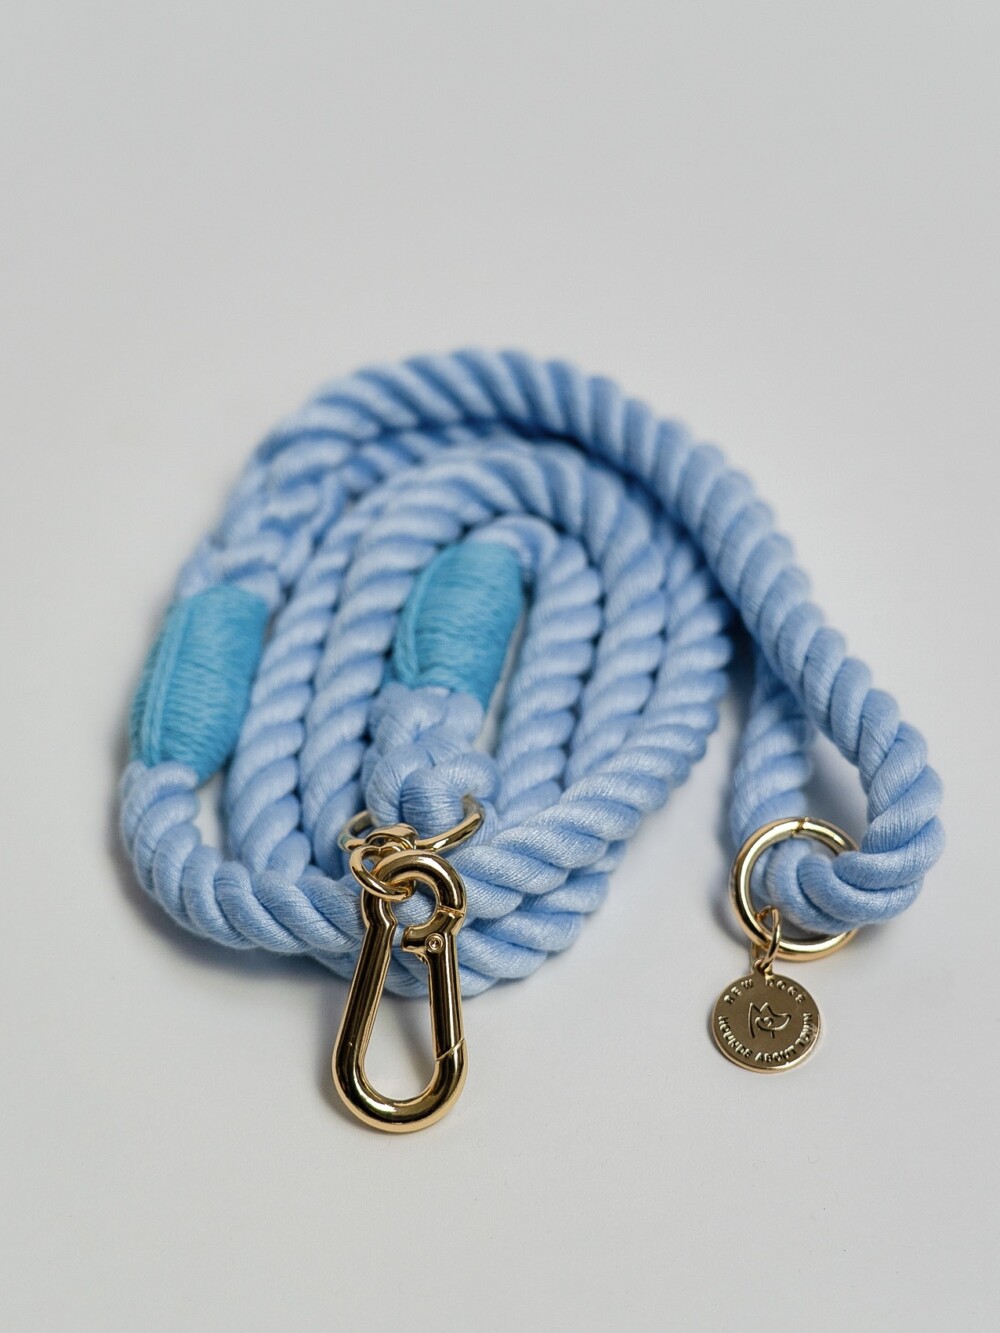 A sky blue rope lead with gold clasp and logo, against a white background